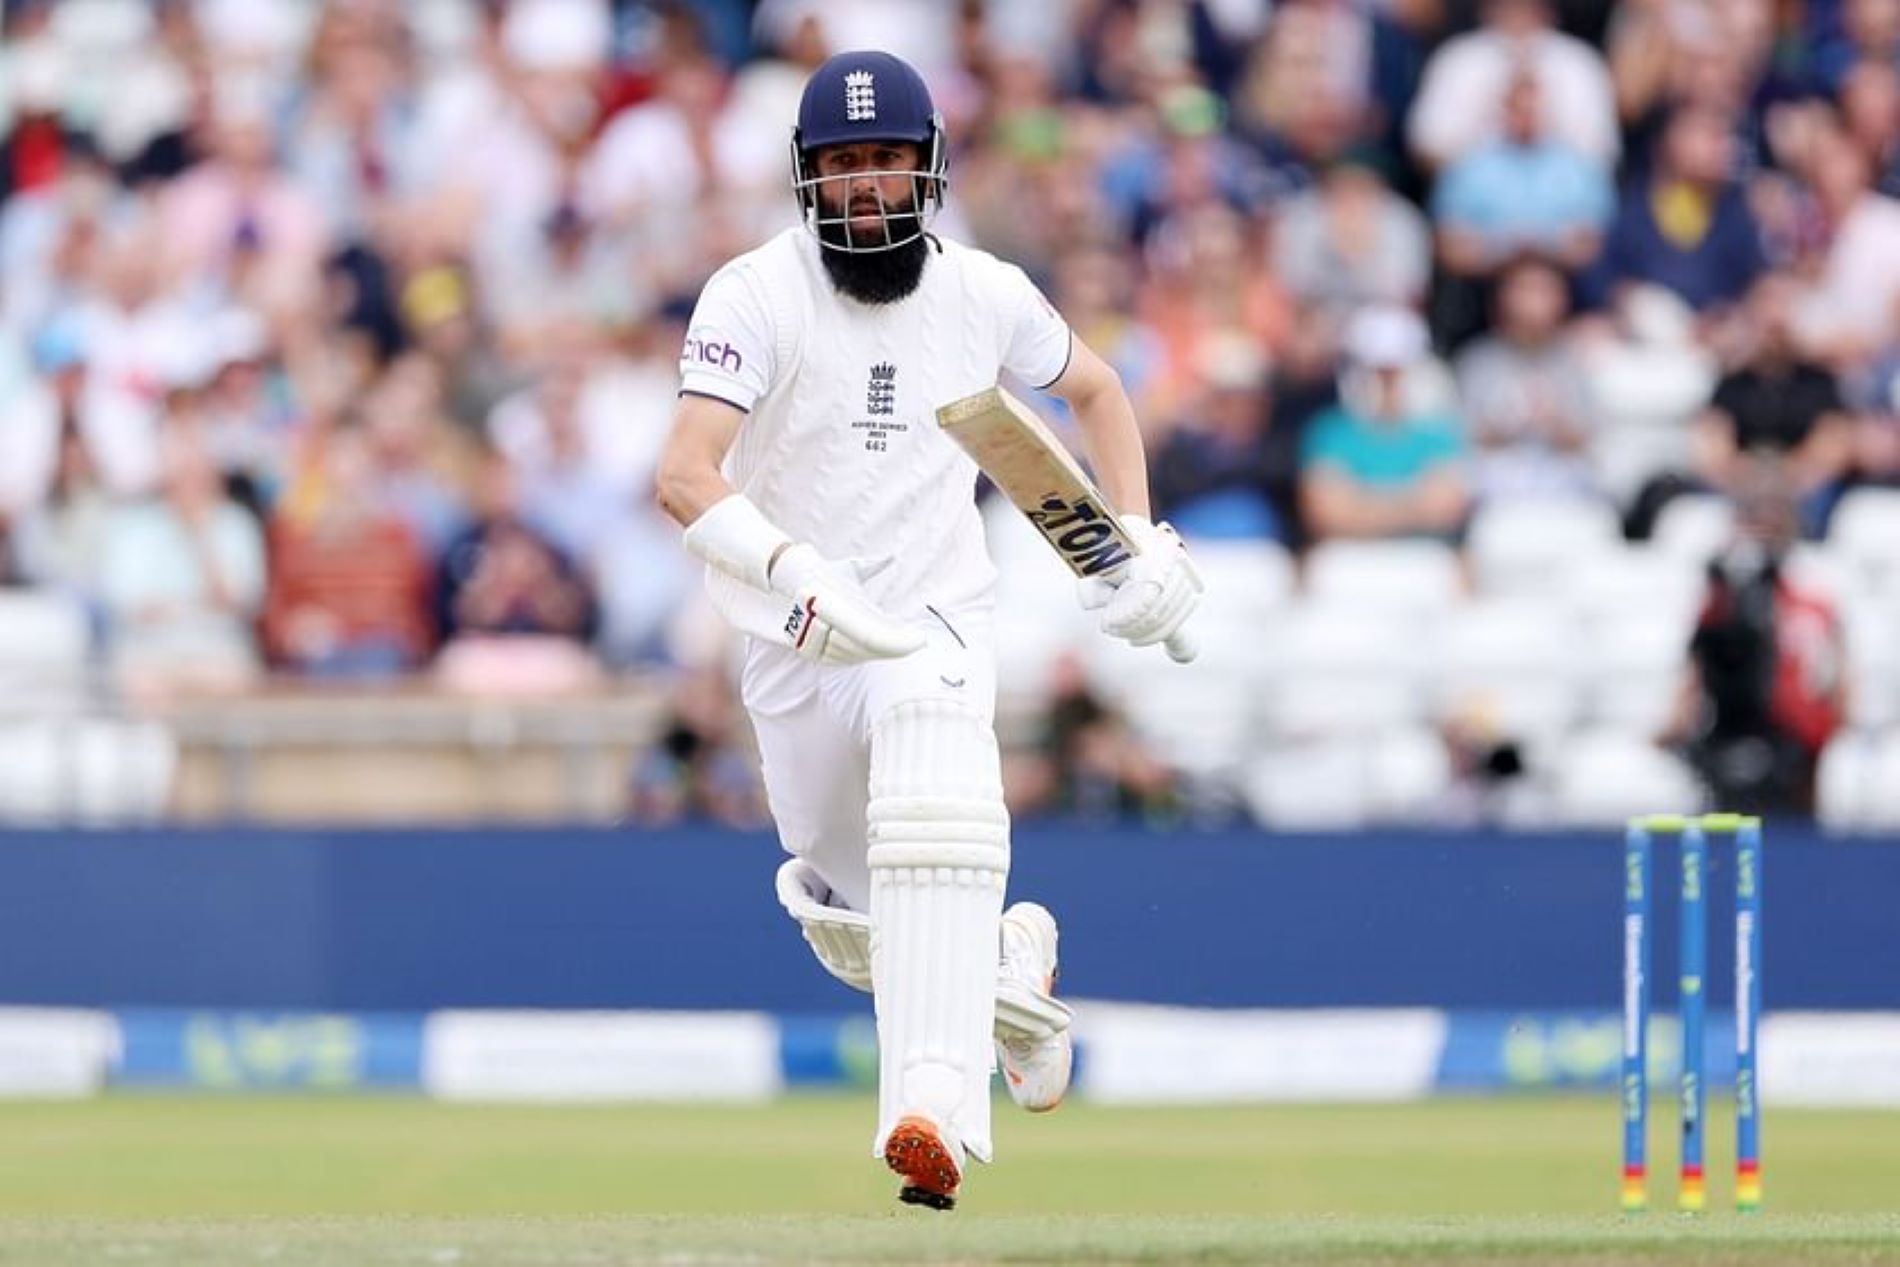 Moeen Ali batted at No.3 for England in the second innings of the third Test